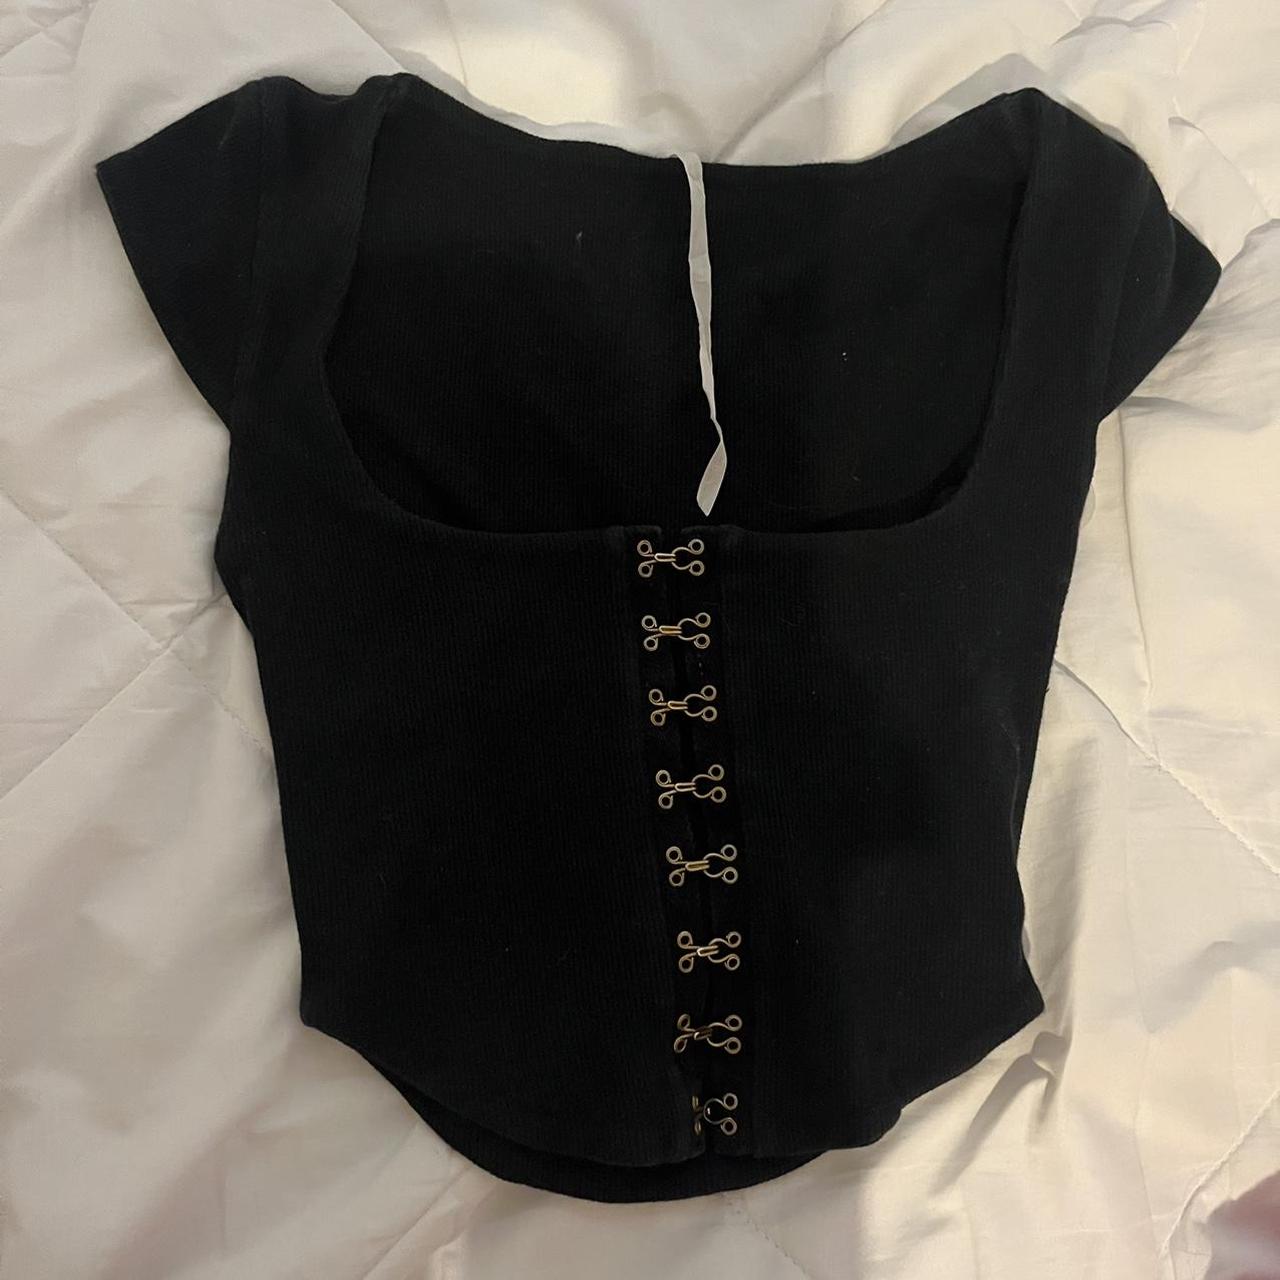 Are You Am I Zihna Top in black, Size small, Hook and